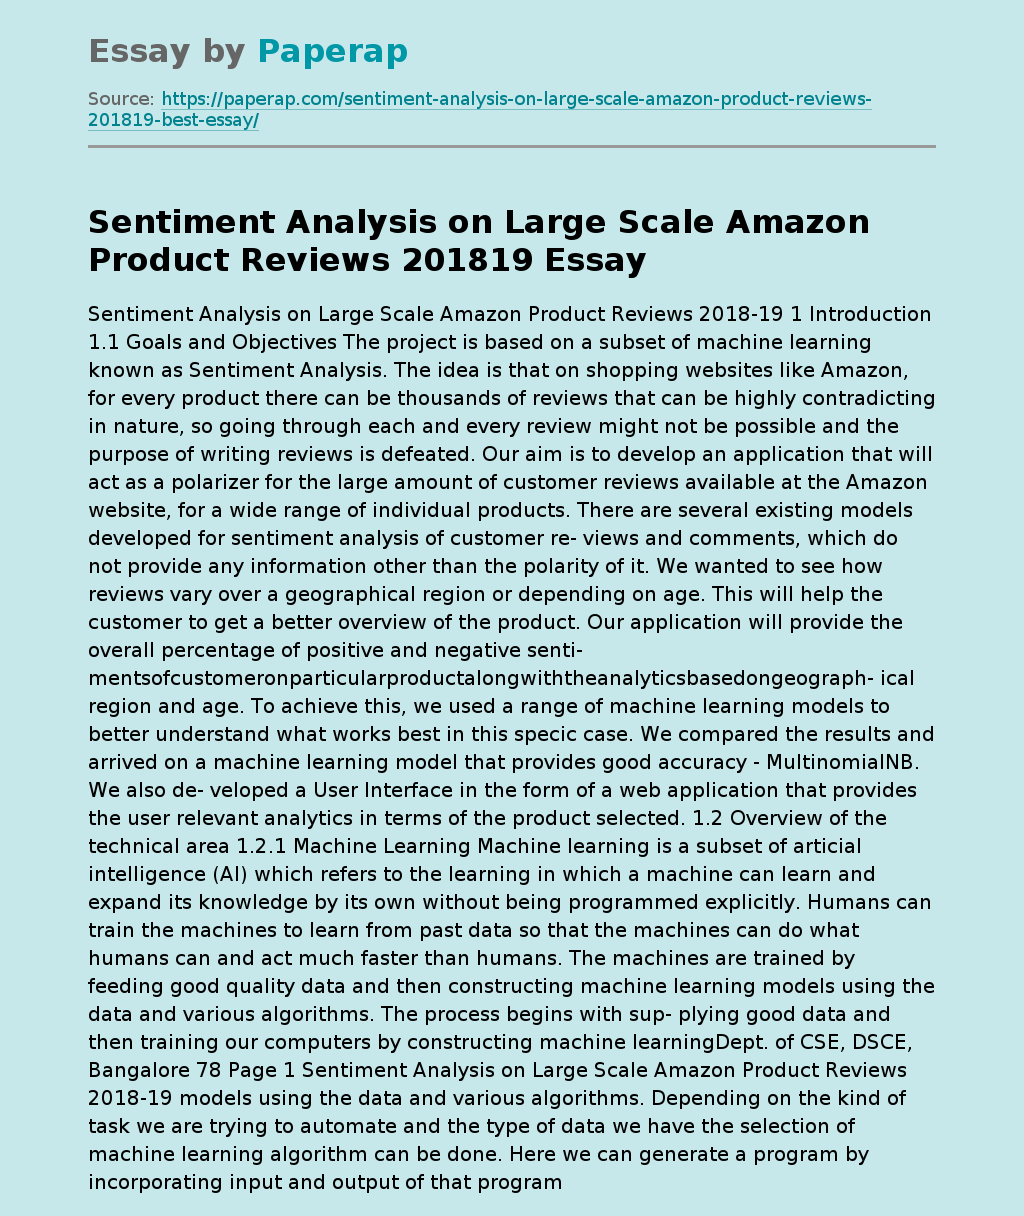 Sentiment Analysis on Large Scale Amazon Product Reviews